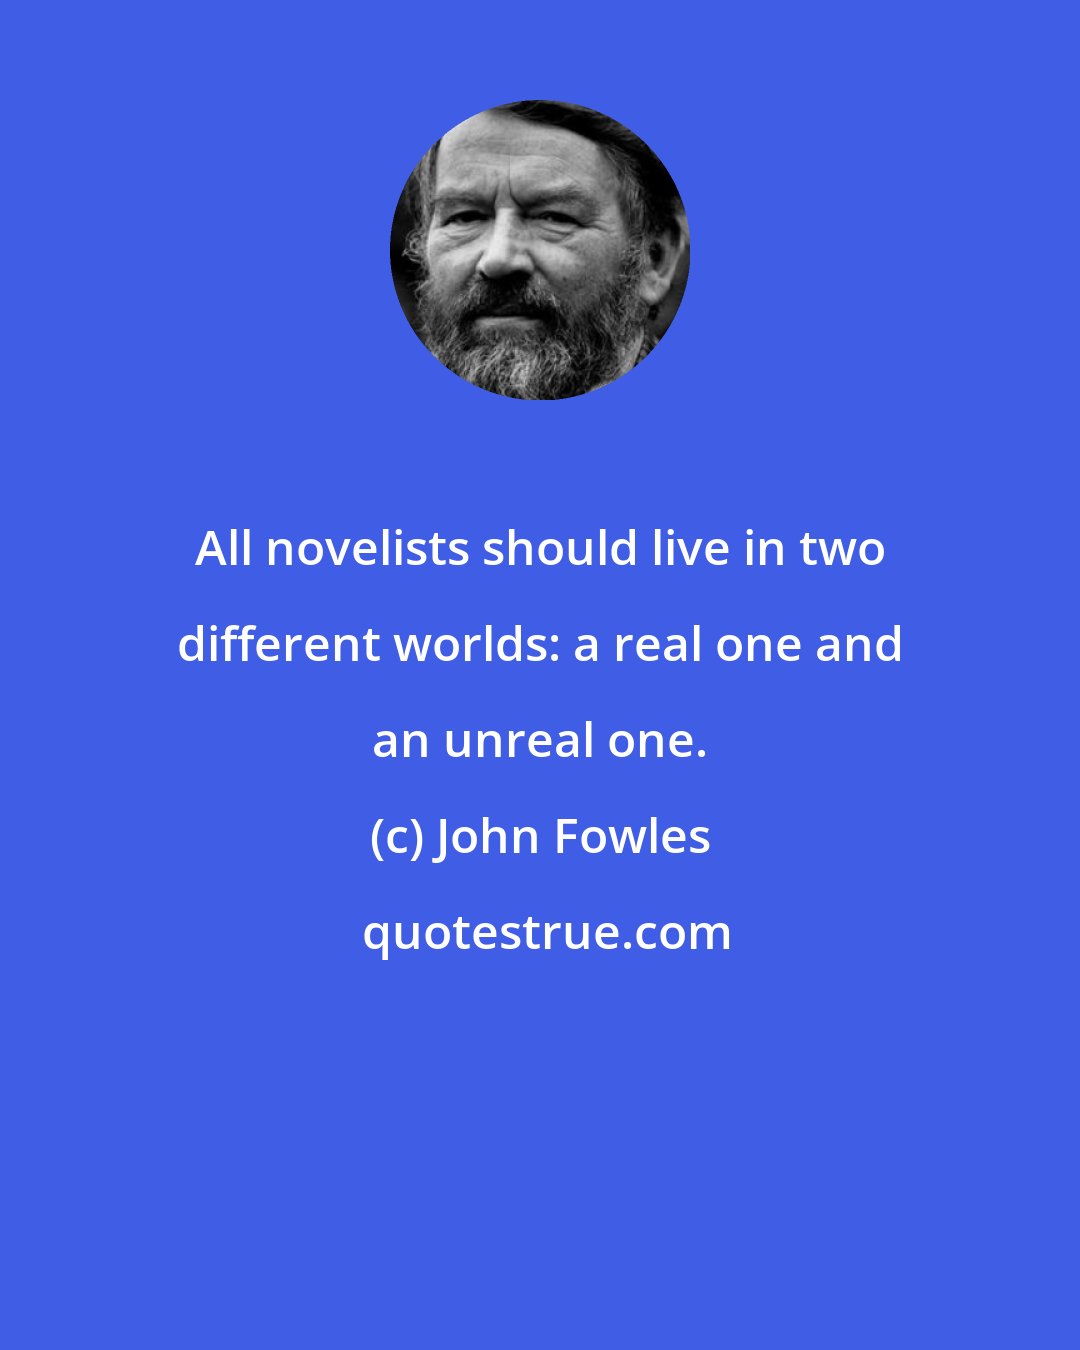 John Fowles: All novelists should live in two different worlds: a real one and an unreal one.